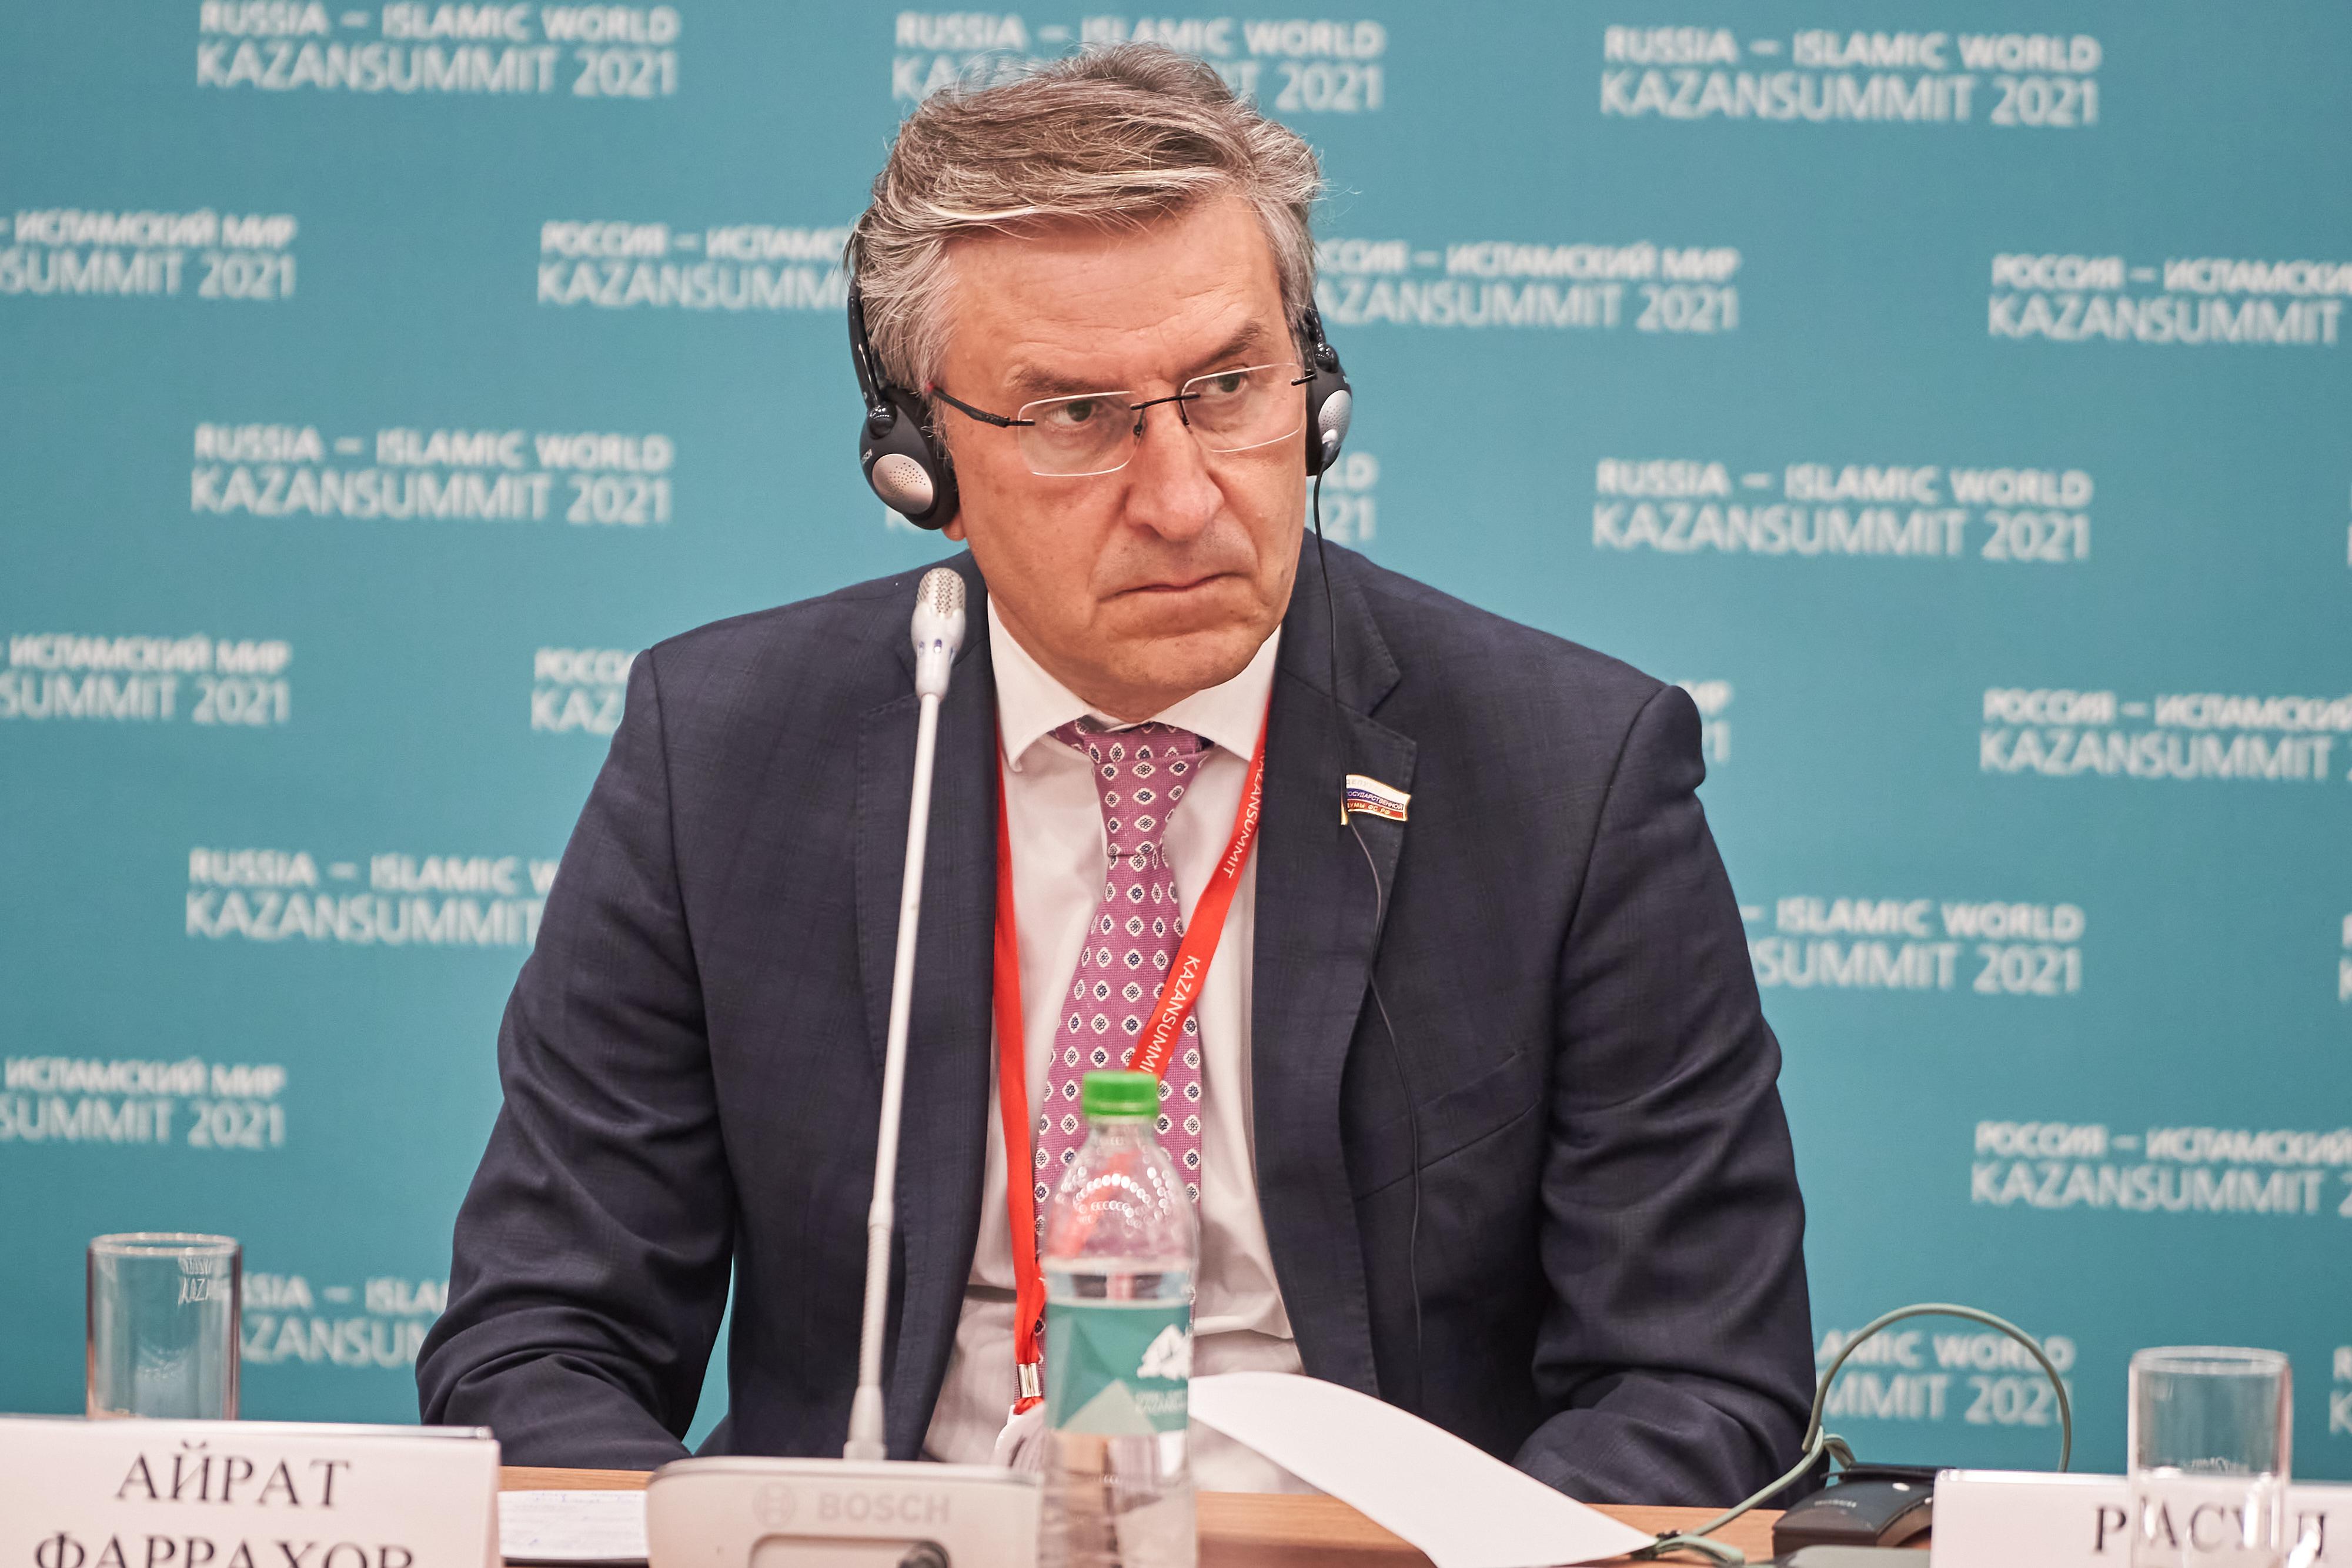 Member of the State Duma Committee on Budget and Taxes Airat Farrakhov